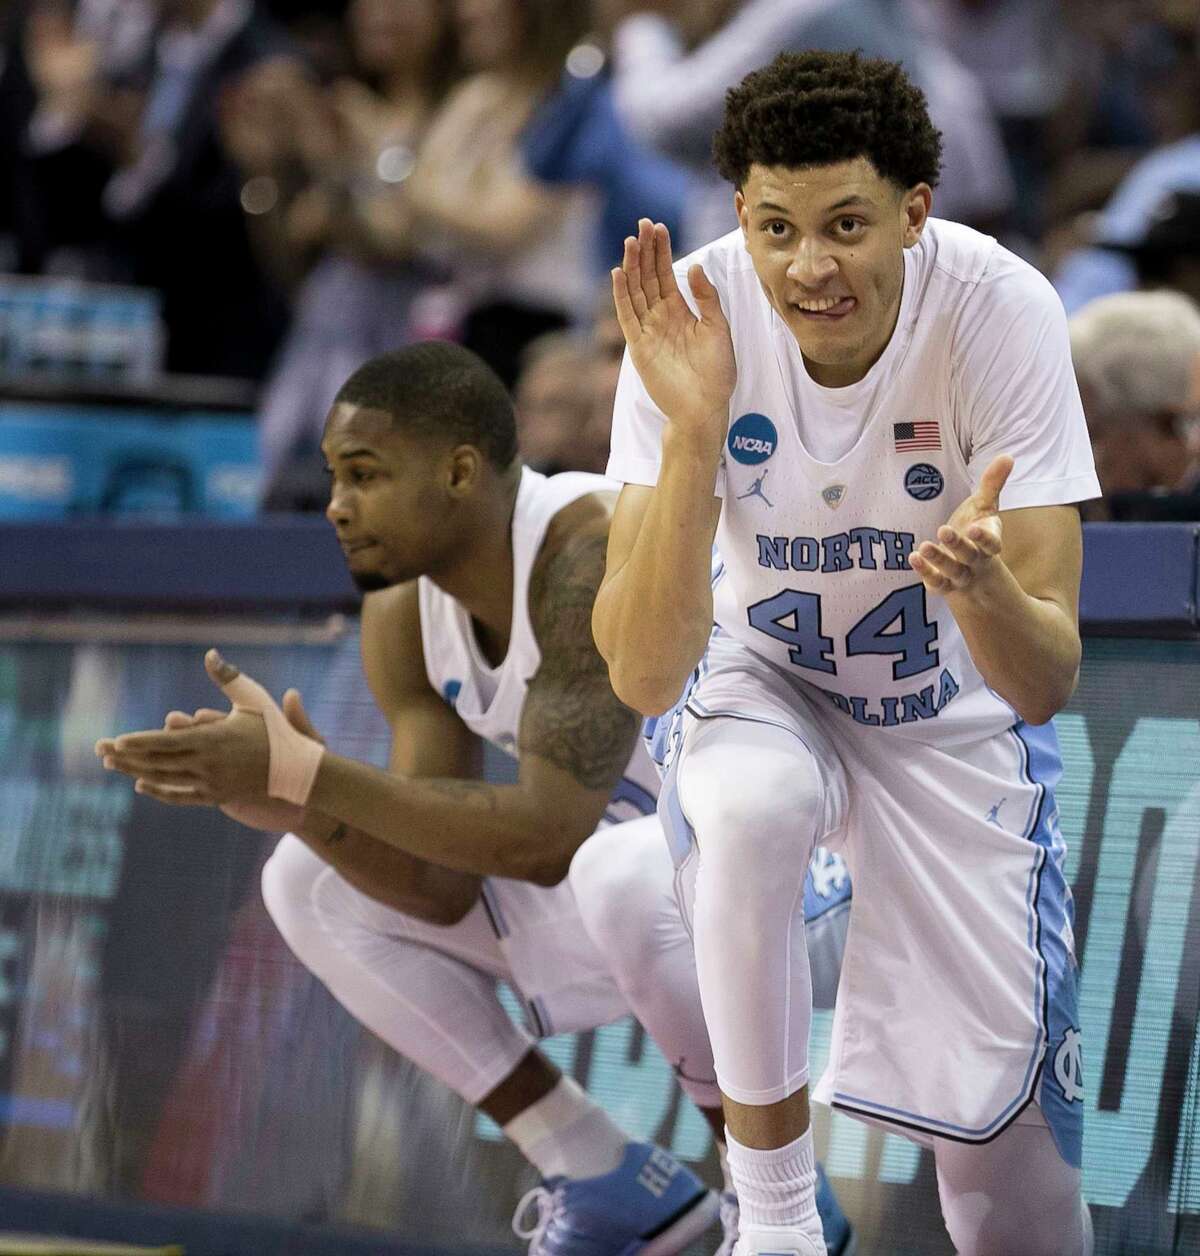 North Carolina's Justin Jackson (44) applauds an early North Carolina lead against Butler in the NCAA Tournament South Regional semifinal at FedExForum in Memphis, Tenn., on March 24, 2017. (Robert Willett/Raleigh News & Observer/TNS)